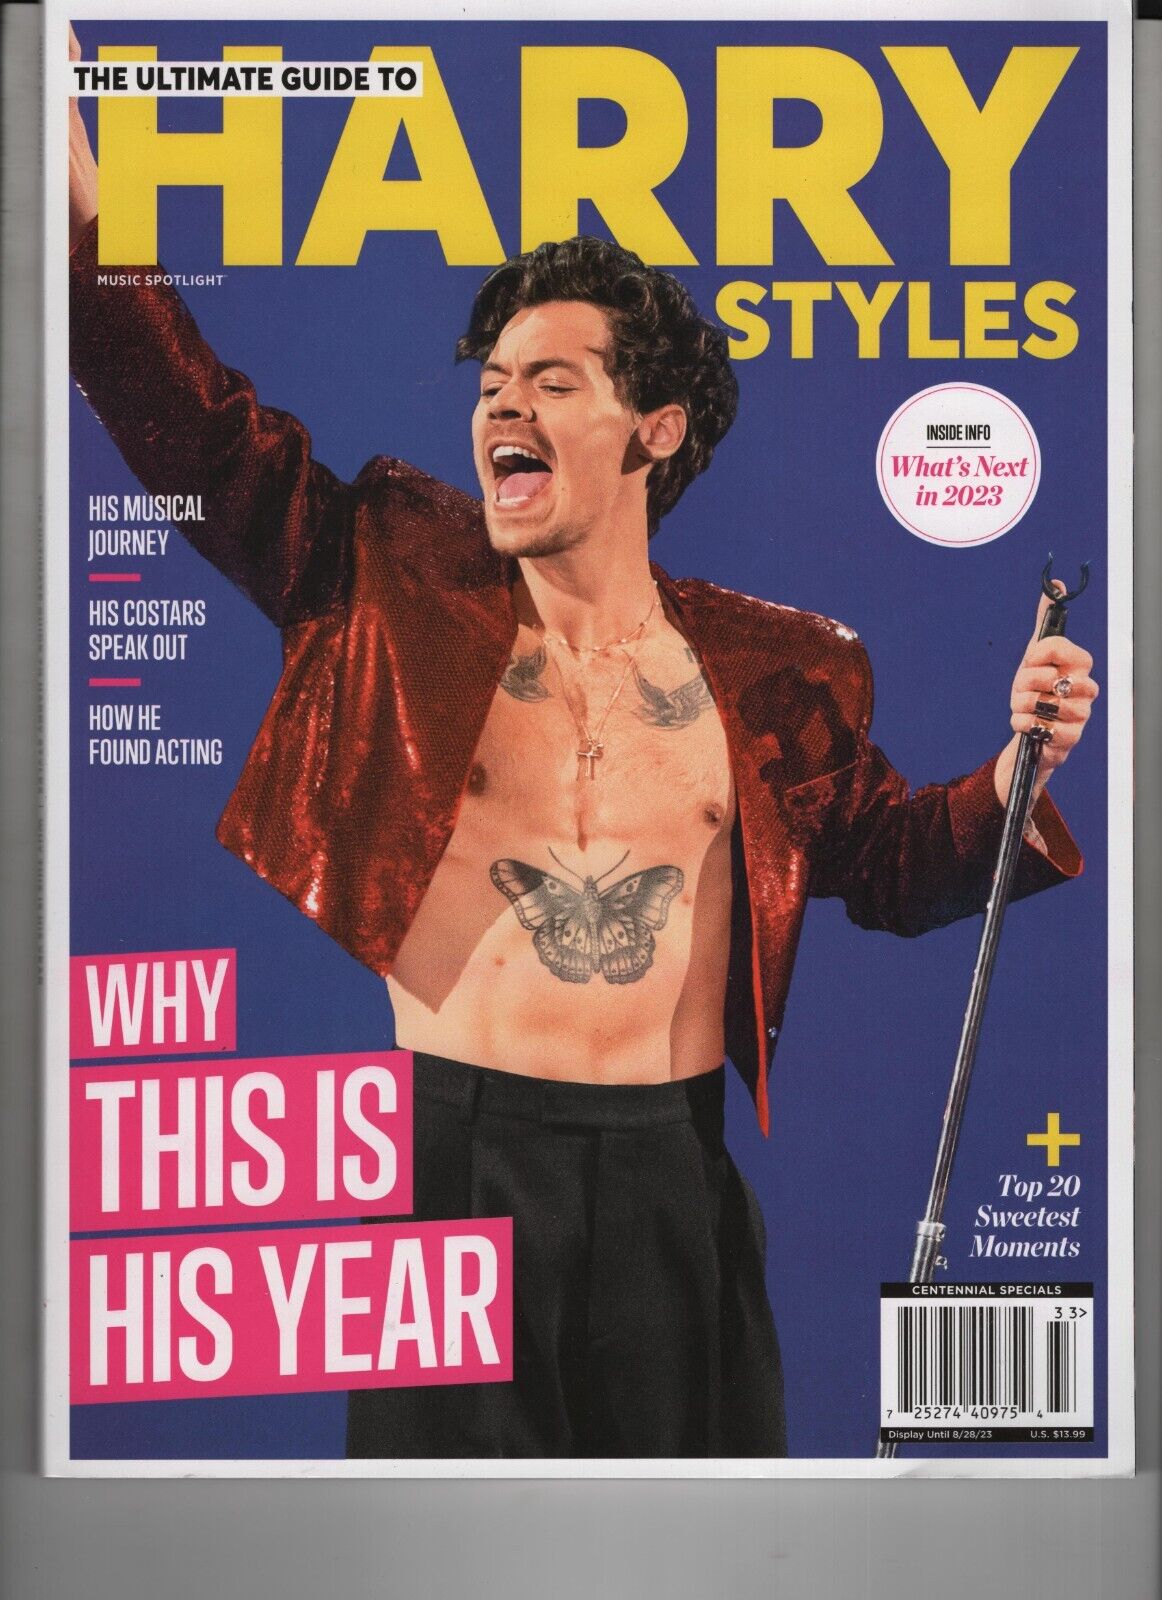 ULTIMATE GUIDE TO HARRY STYLES CENTENNIAL MAGAZINE 2023 A360 MEDIA